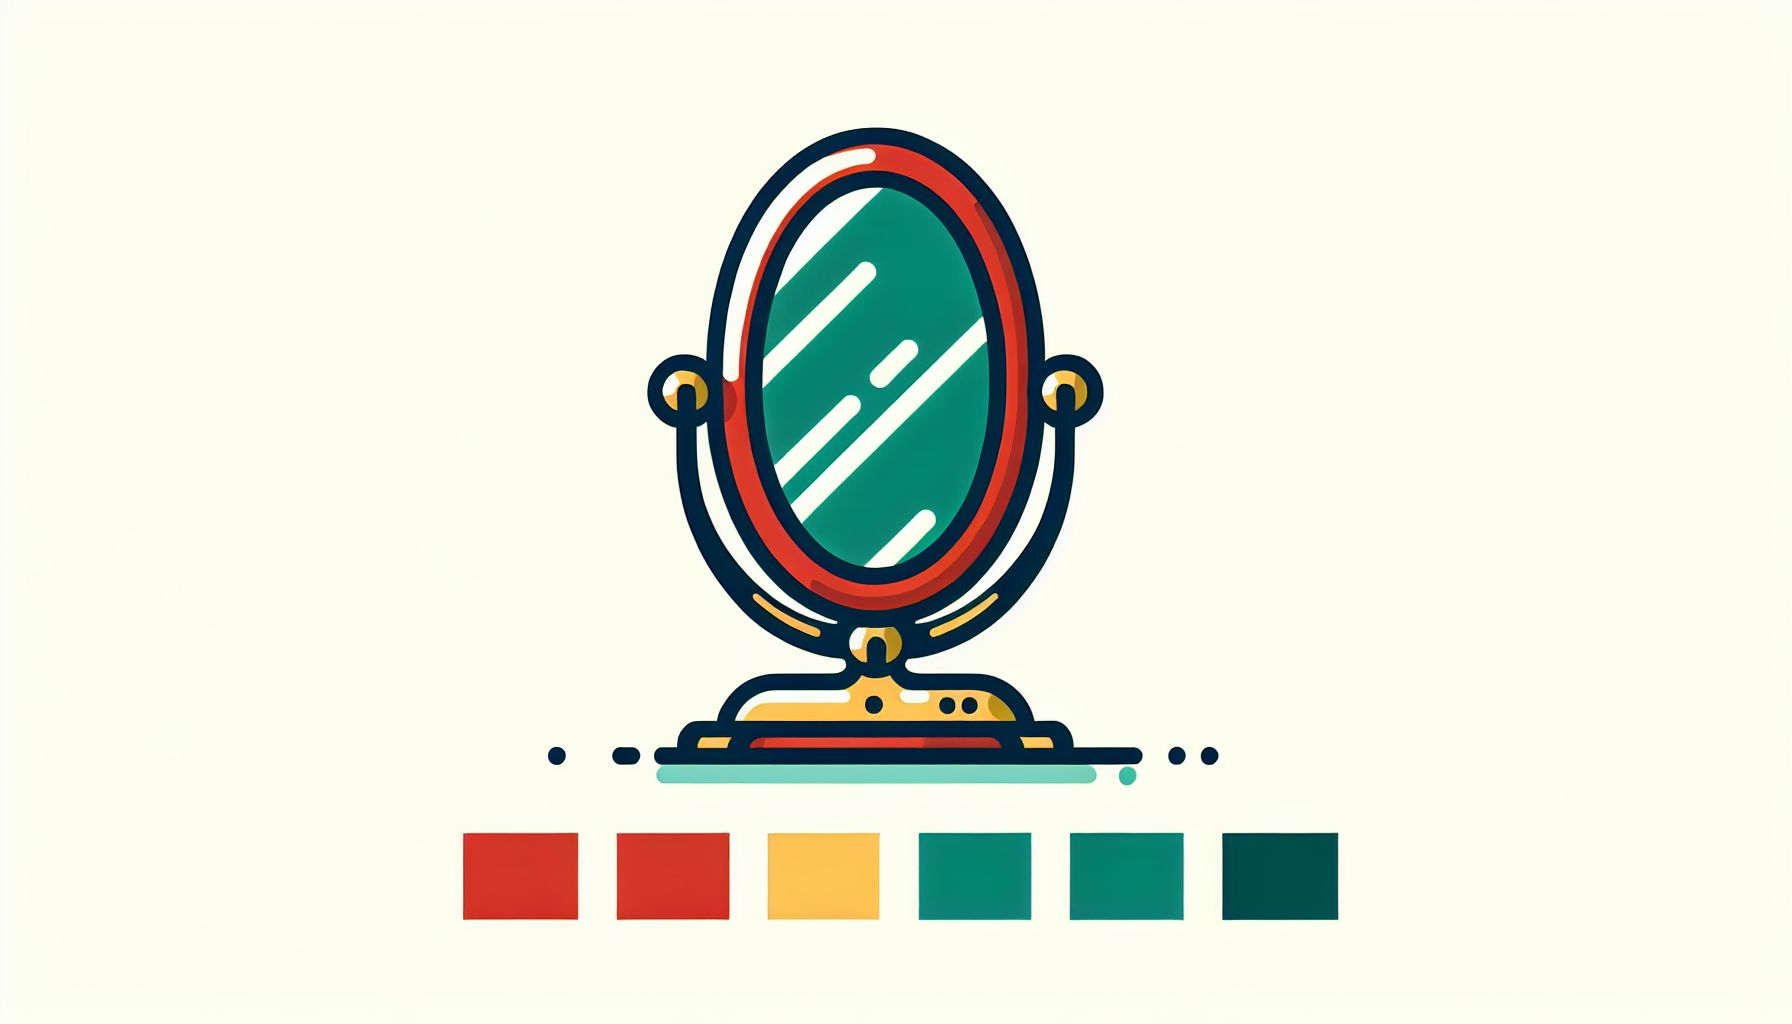 Mirror in flat illustration style and white background, red #f47574, green #88c7a8, yellow #fcc44b, and blue #645bc8 colors.